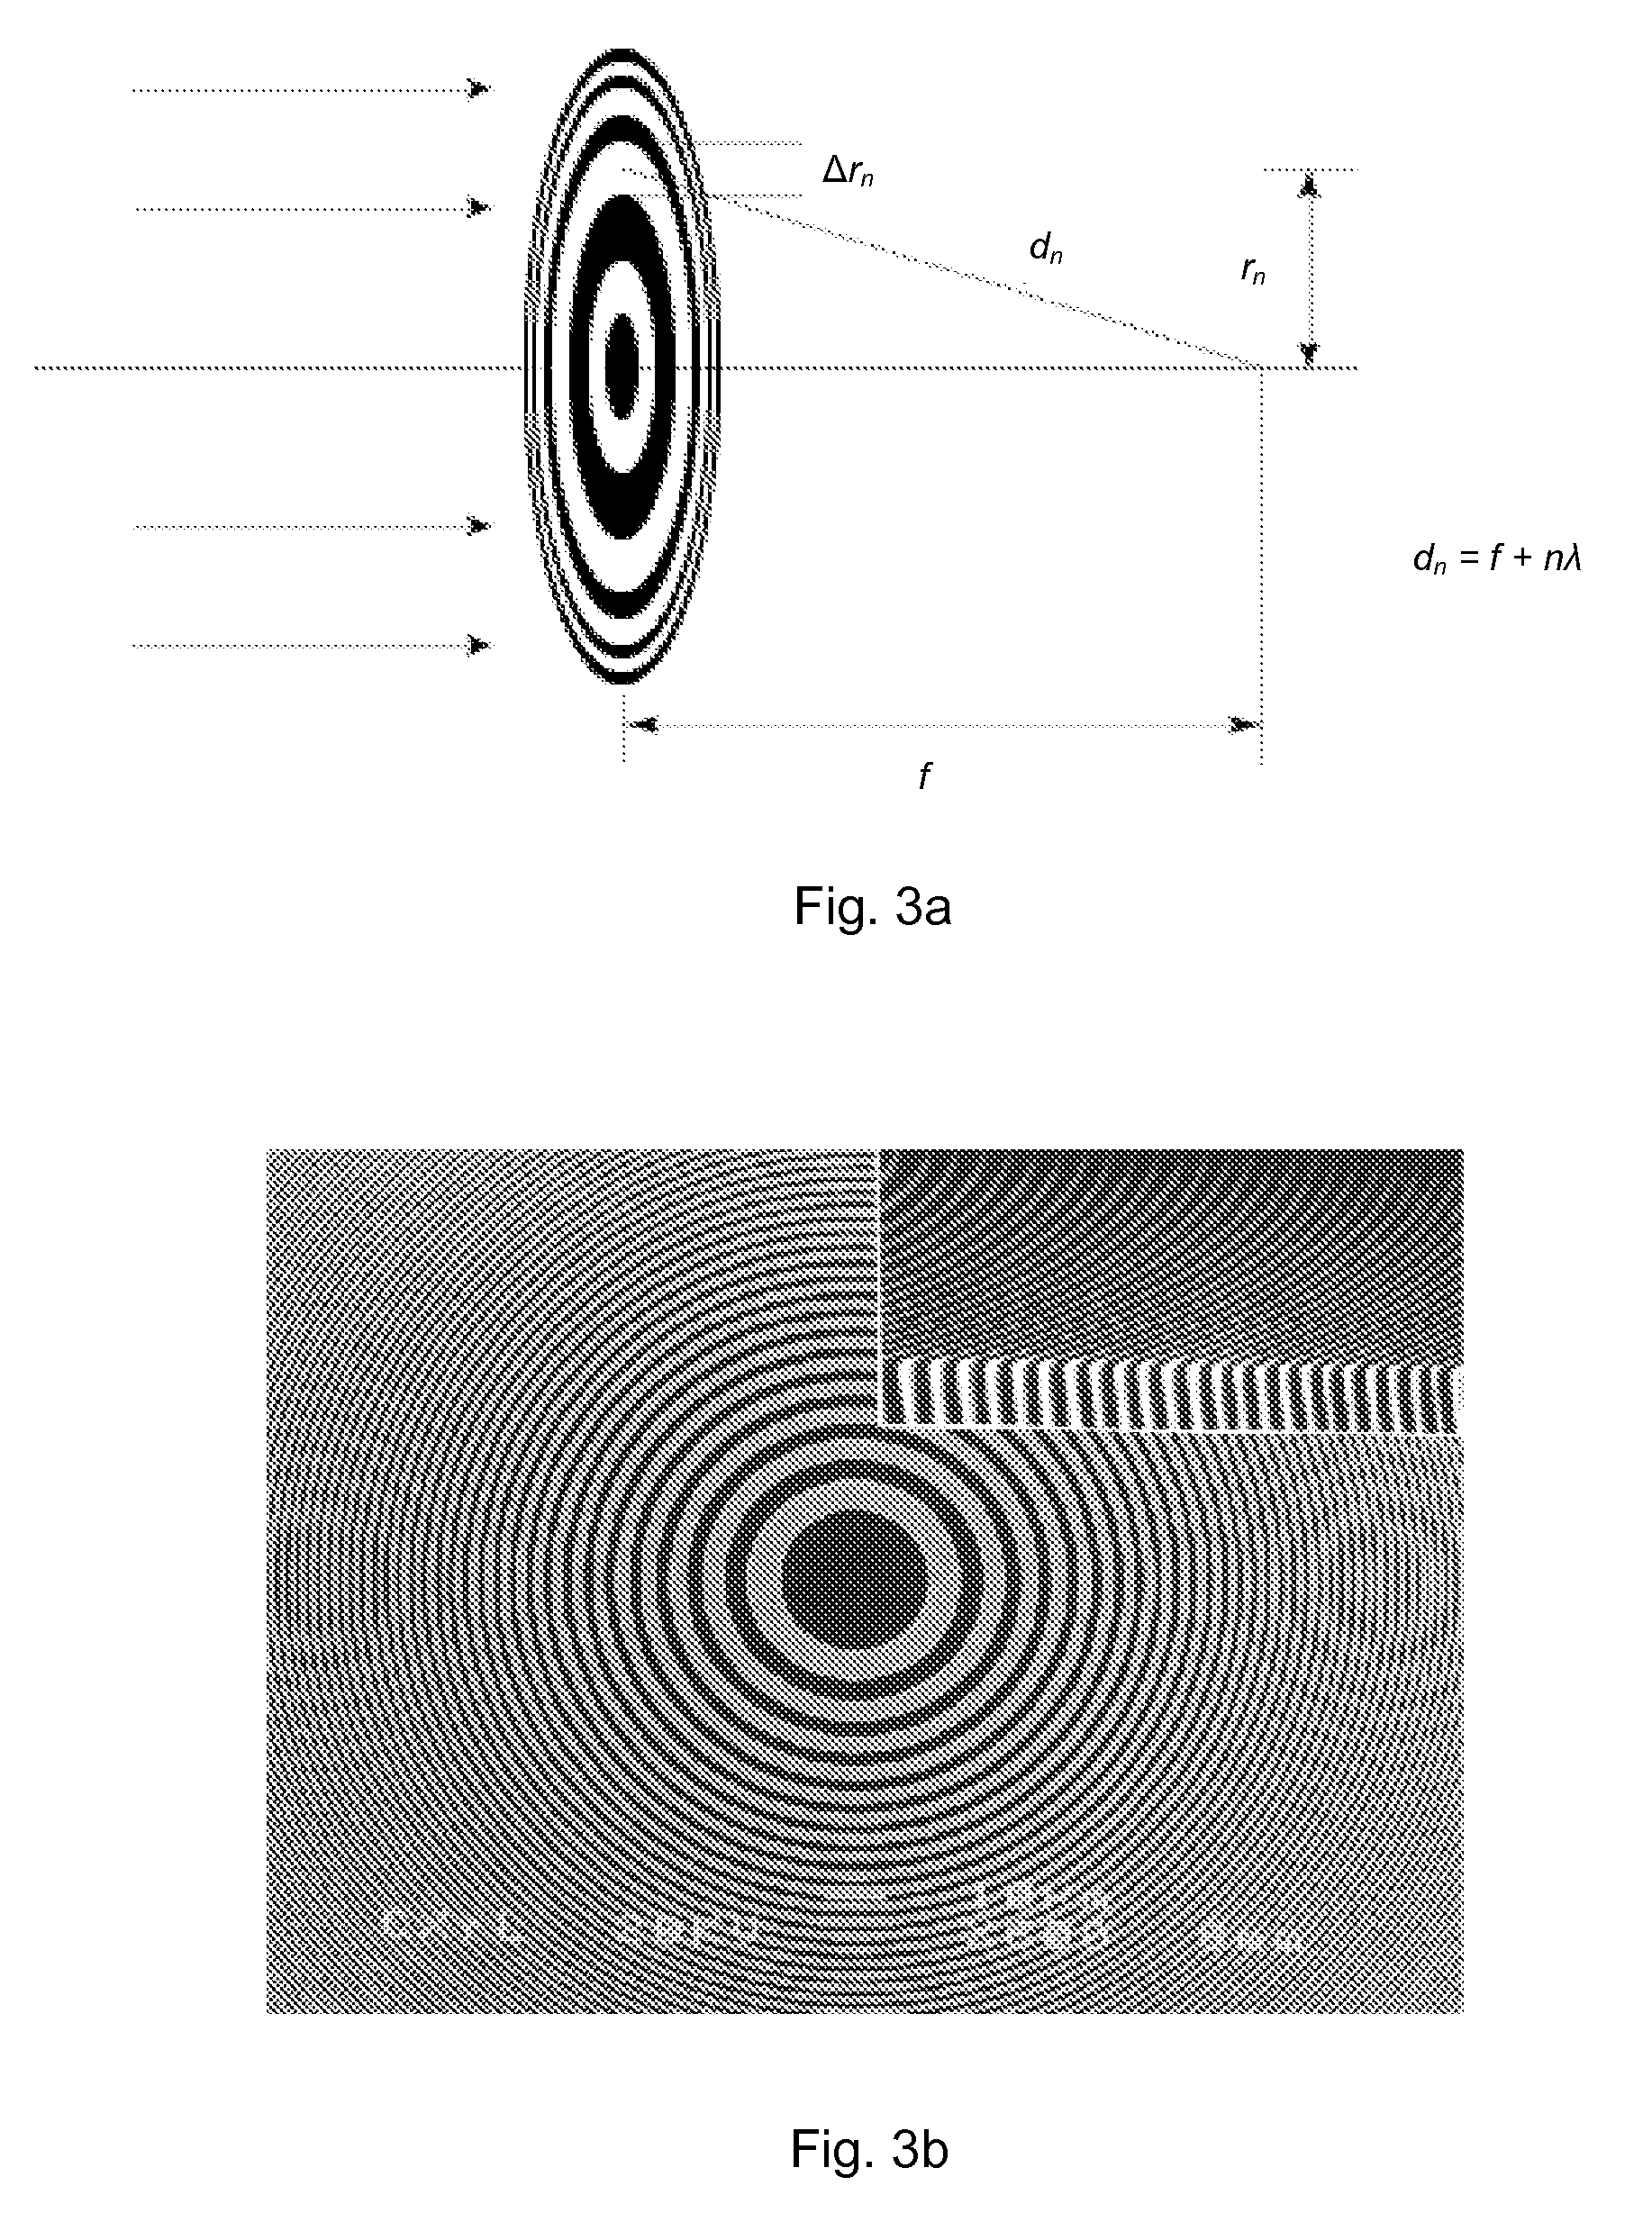 Optimized x-ray energy for high resolution imaging of integrated circuits structures